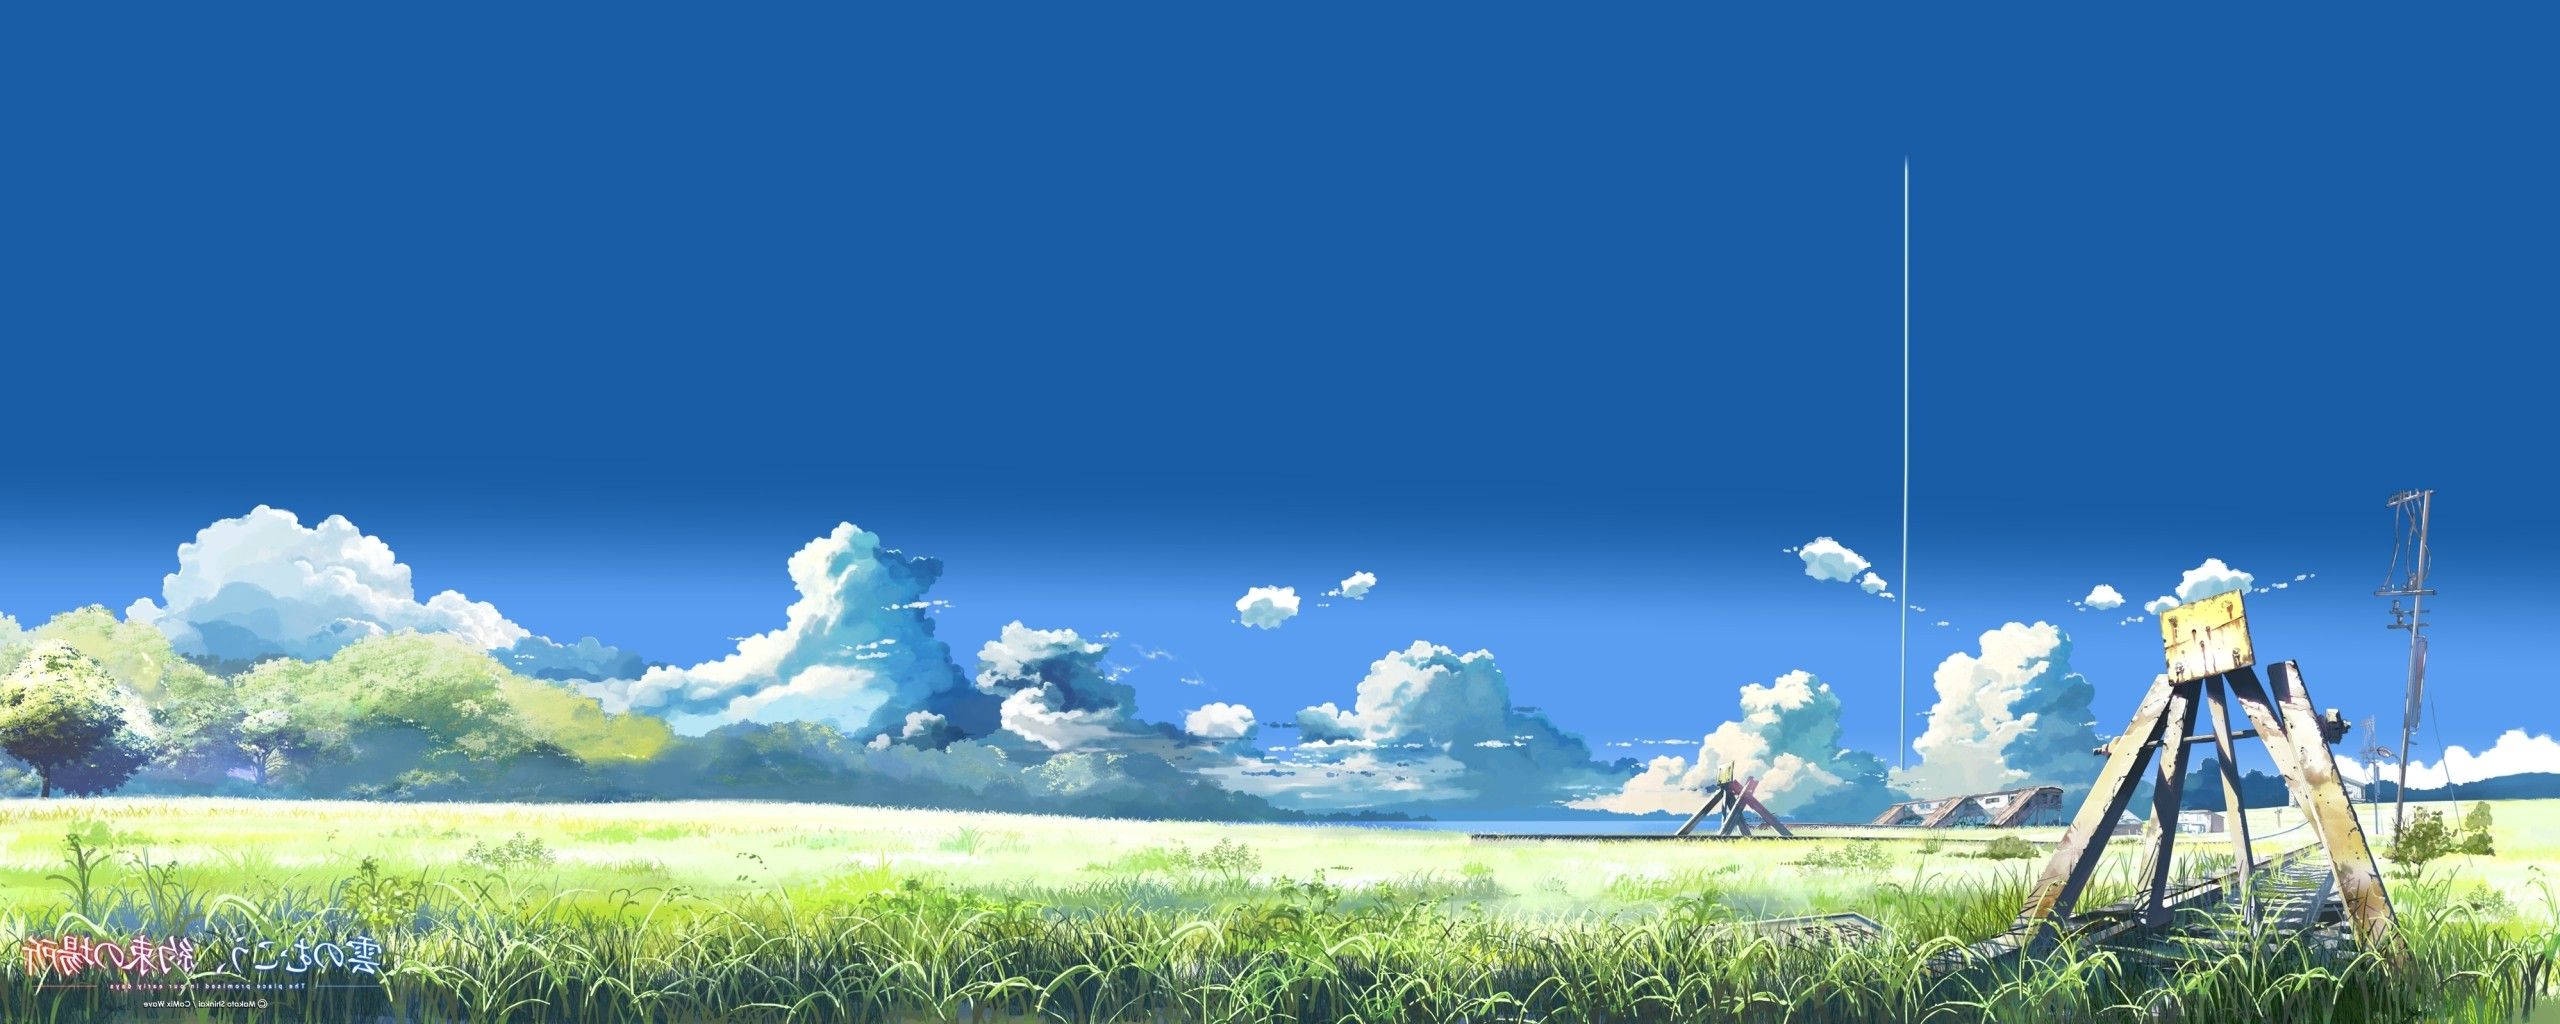 Wallpaper, landscape, anime, nature, sky, field, clouds, Tourism, blue, wind, summer, Makoto Shinkai, The Place Promised In Our Early Days, mount scenery, contrails, steppe, cloud, tree, grassland, leisure, pole, pasture, meadow